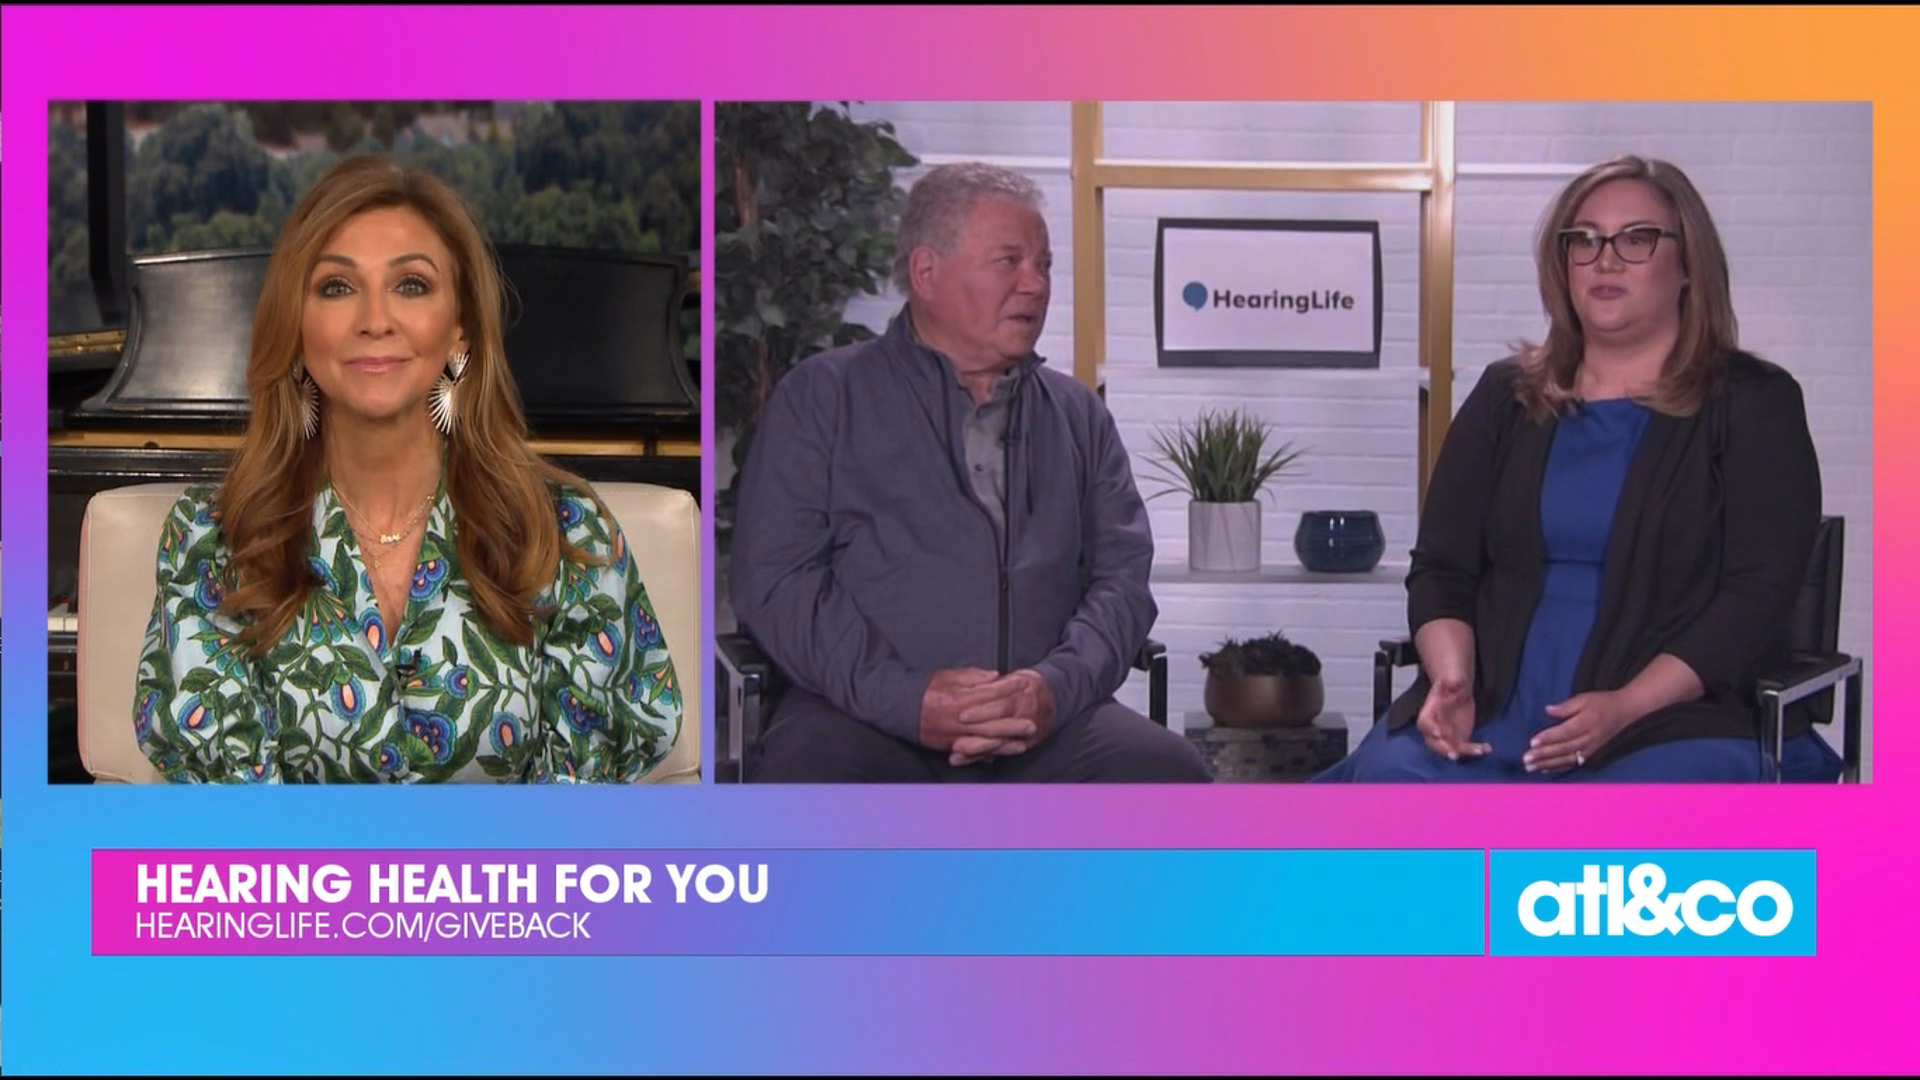 Actor William Shatner has teamed up with HearingLife to spread awareness about the importance of hearing care.